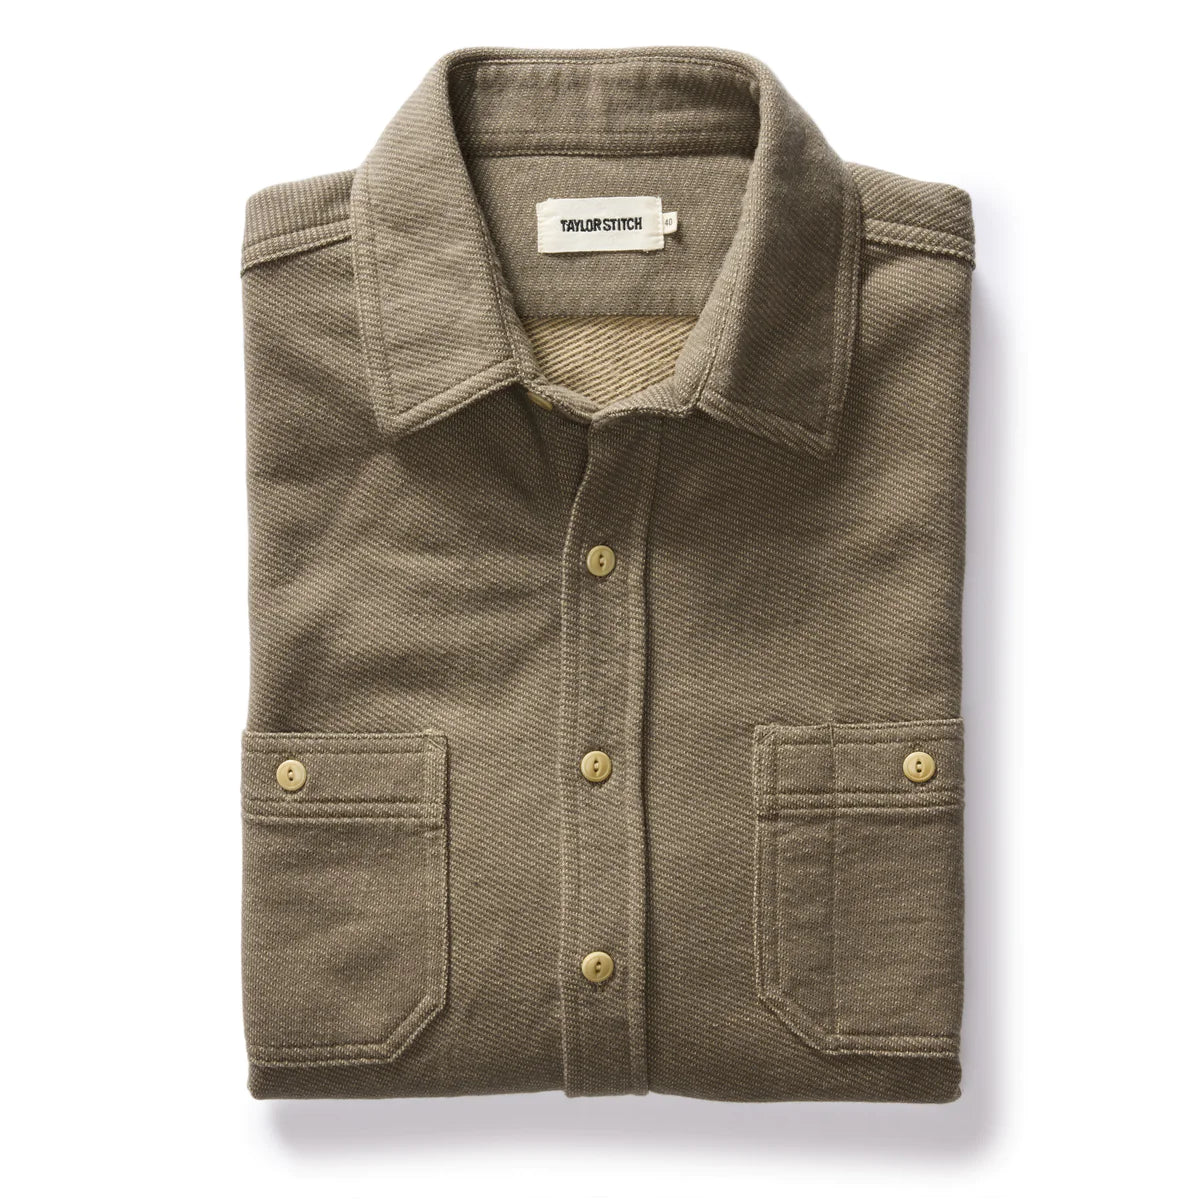 Taylor Stitch - The Utility Shirt in Fatigue Olive French Terry Knit